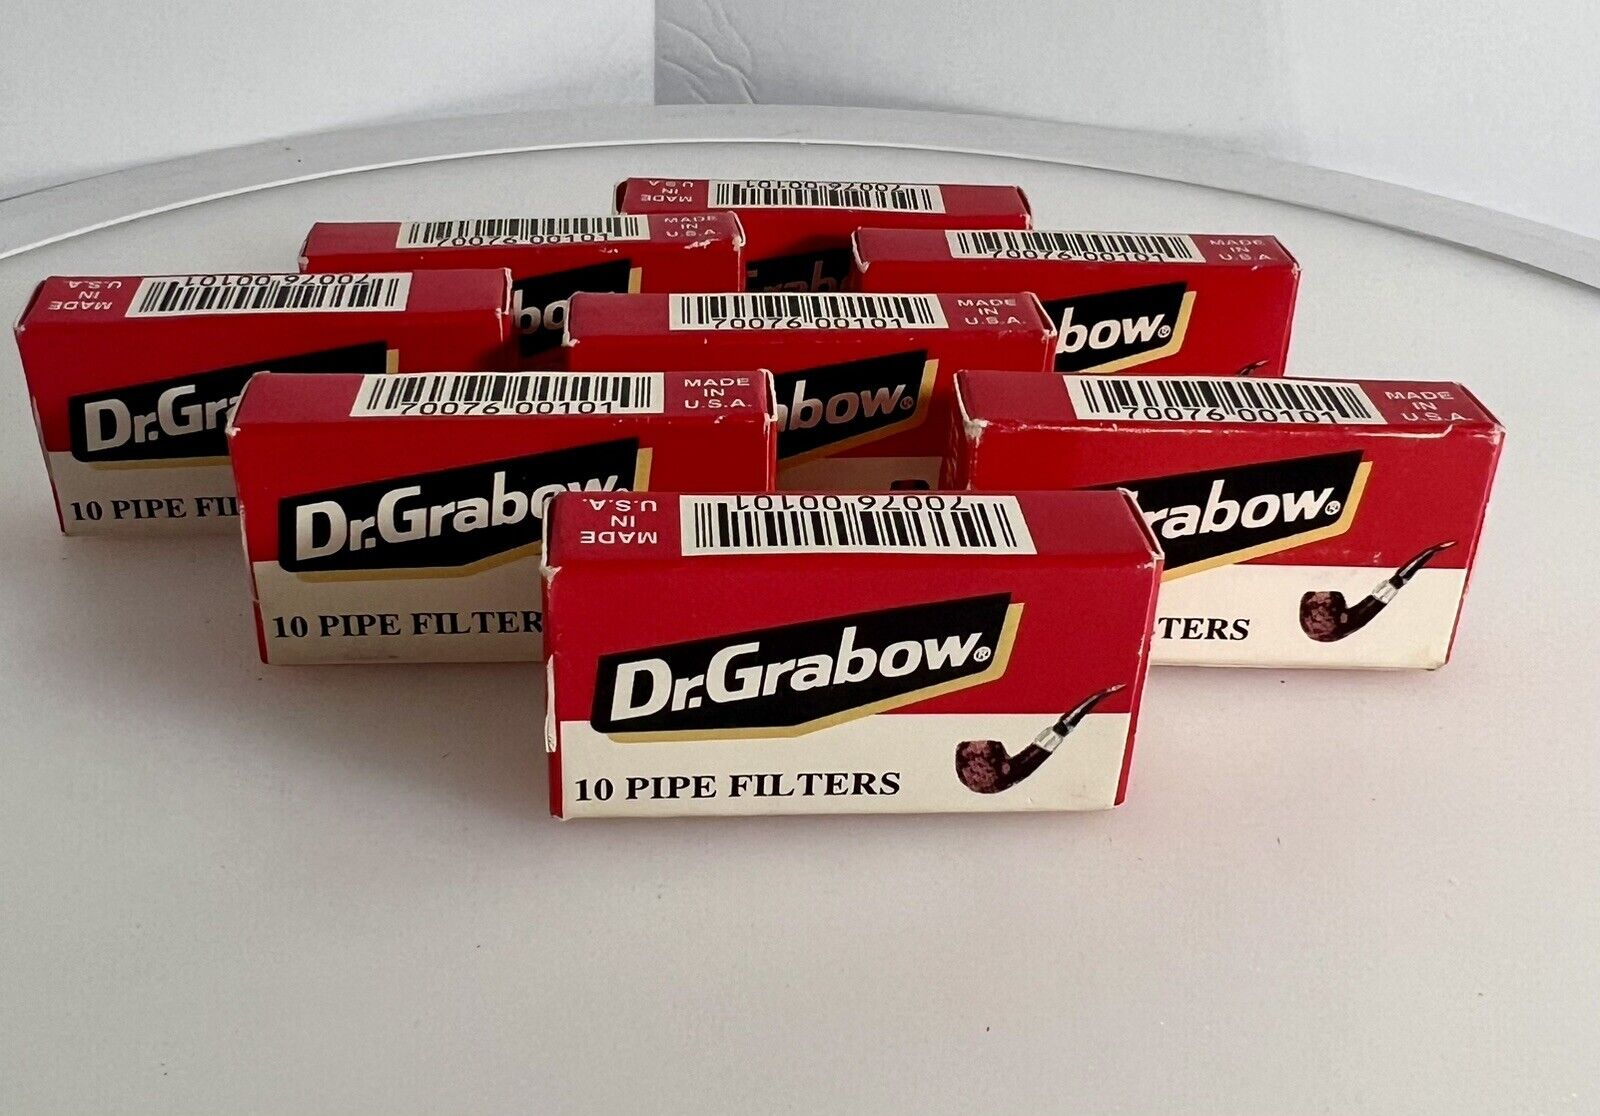 Dr. Grabow Pipe Filters - 8 Boxes of 10 Filters